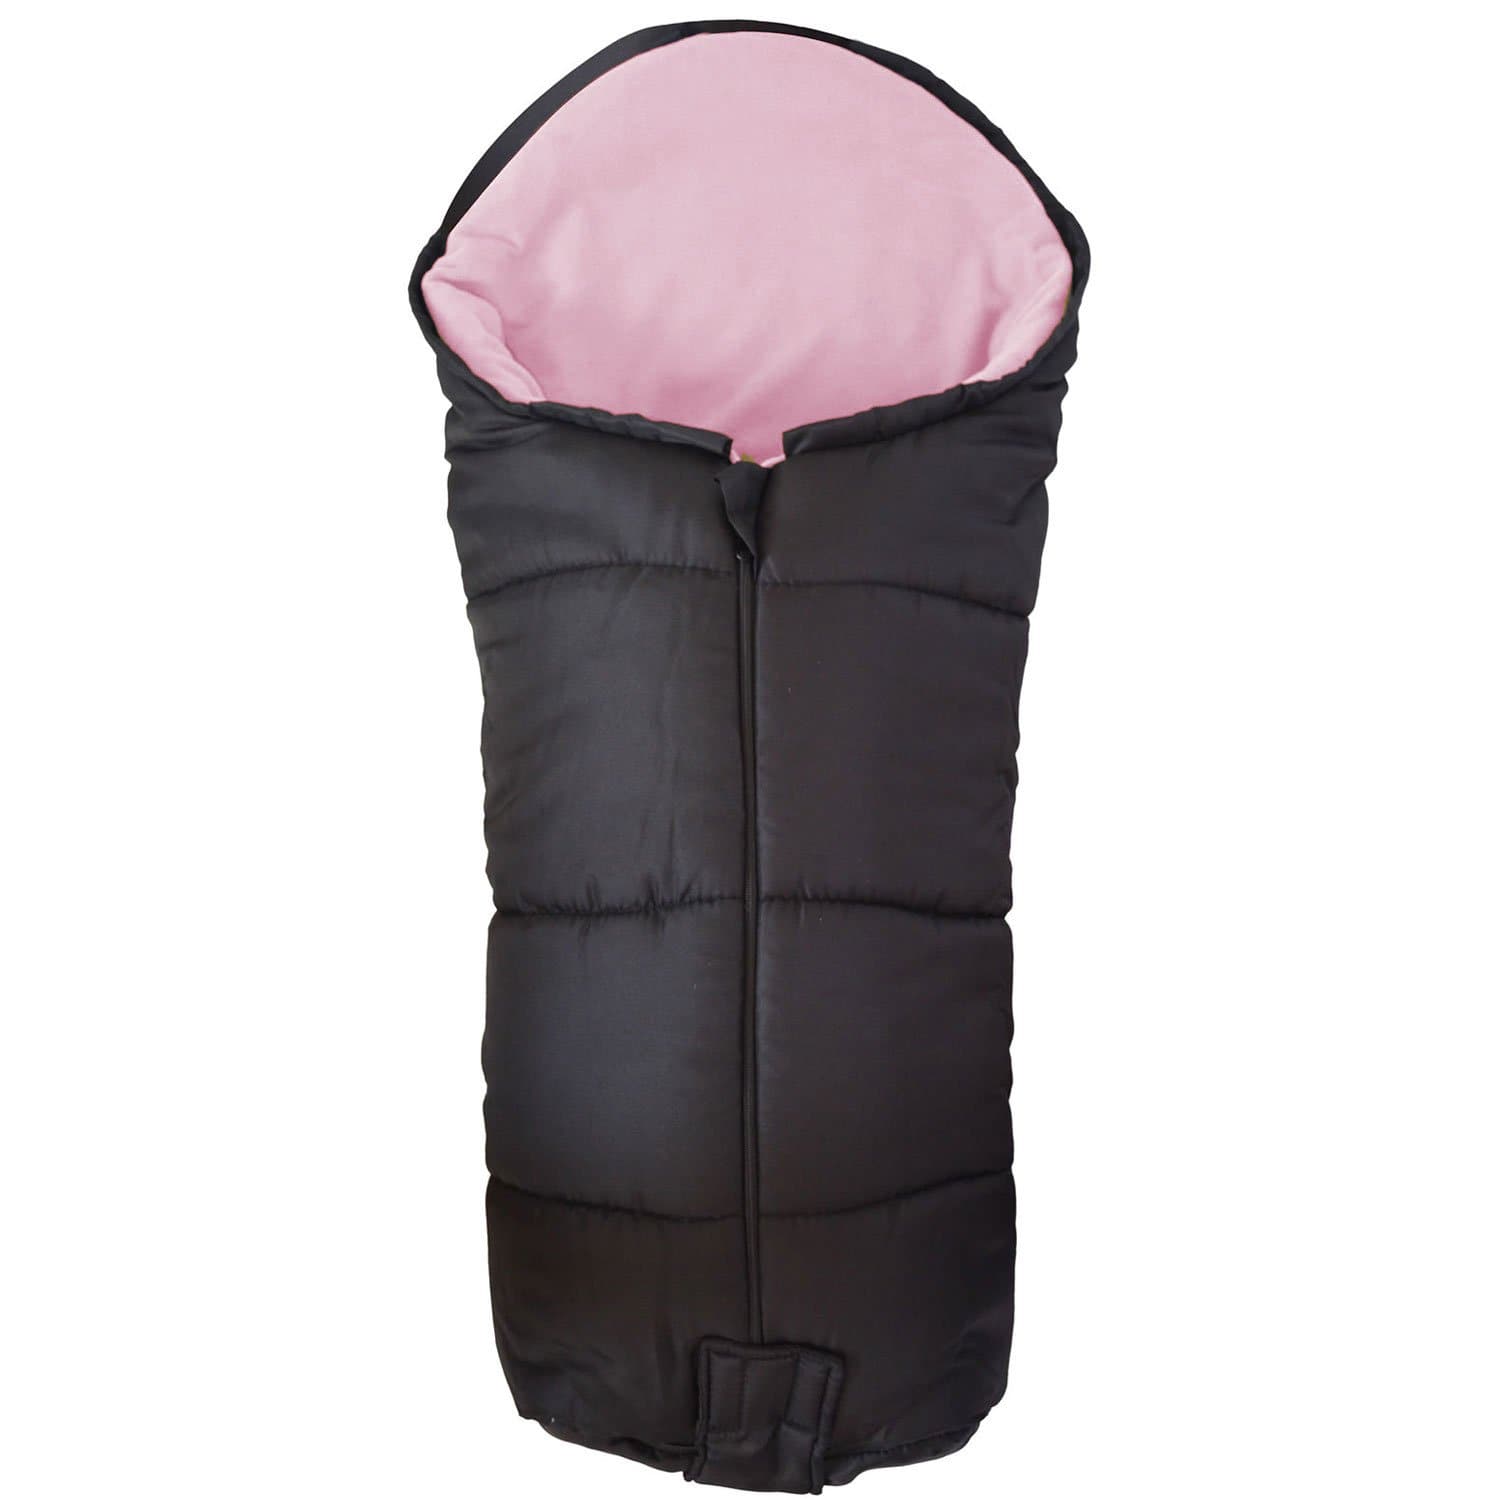 Deluxe Footmuff / Cosy Toes Compatible with Bugaboo - Light Pink / Fits All Models | For Your Little One